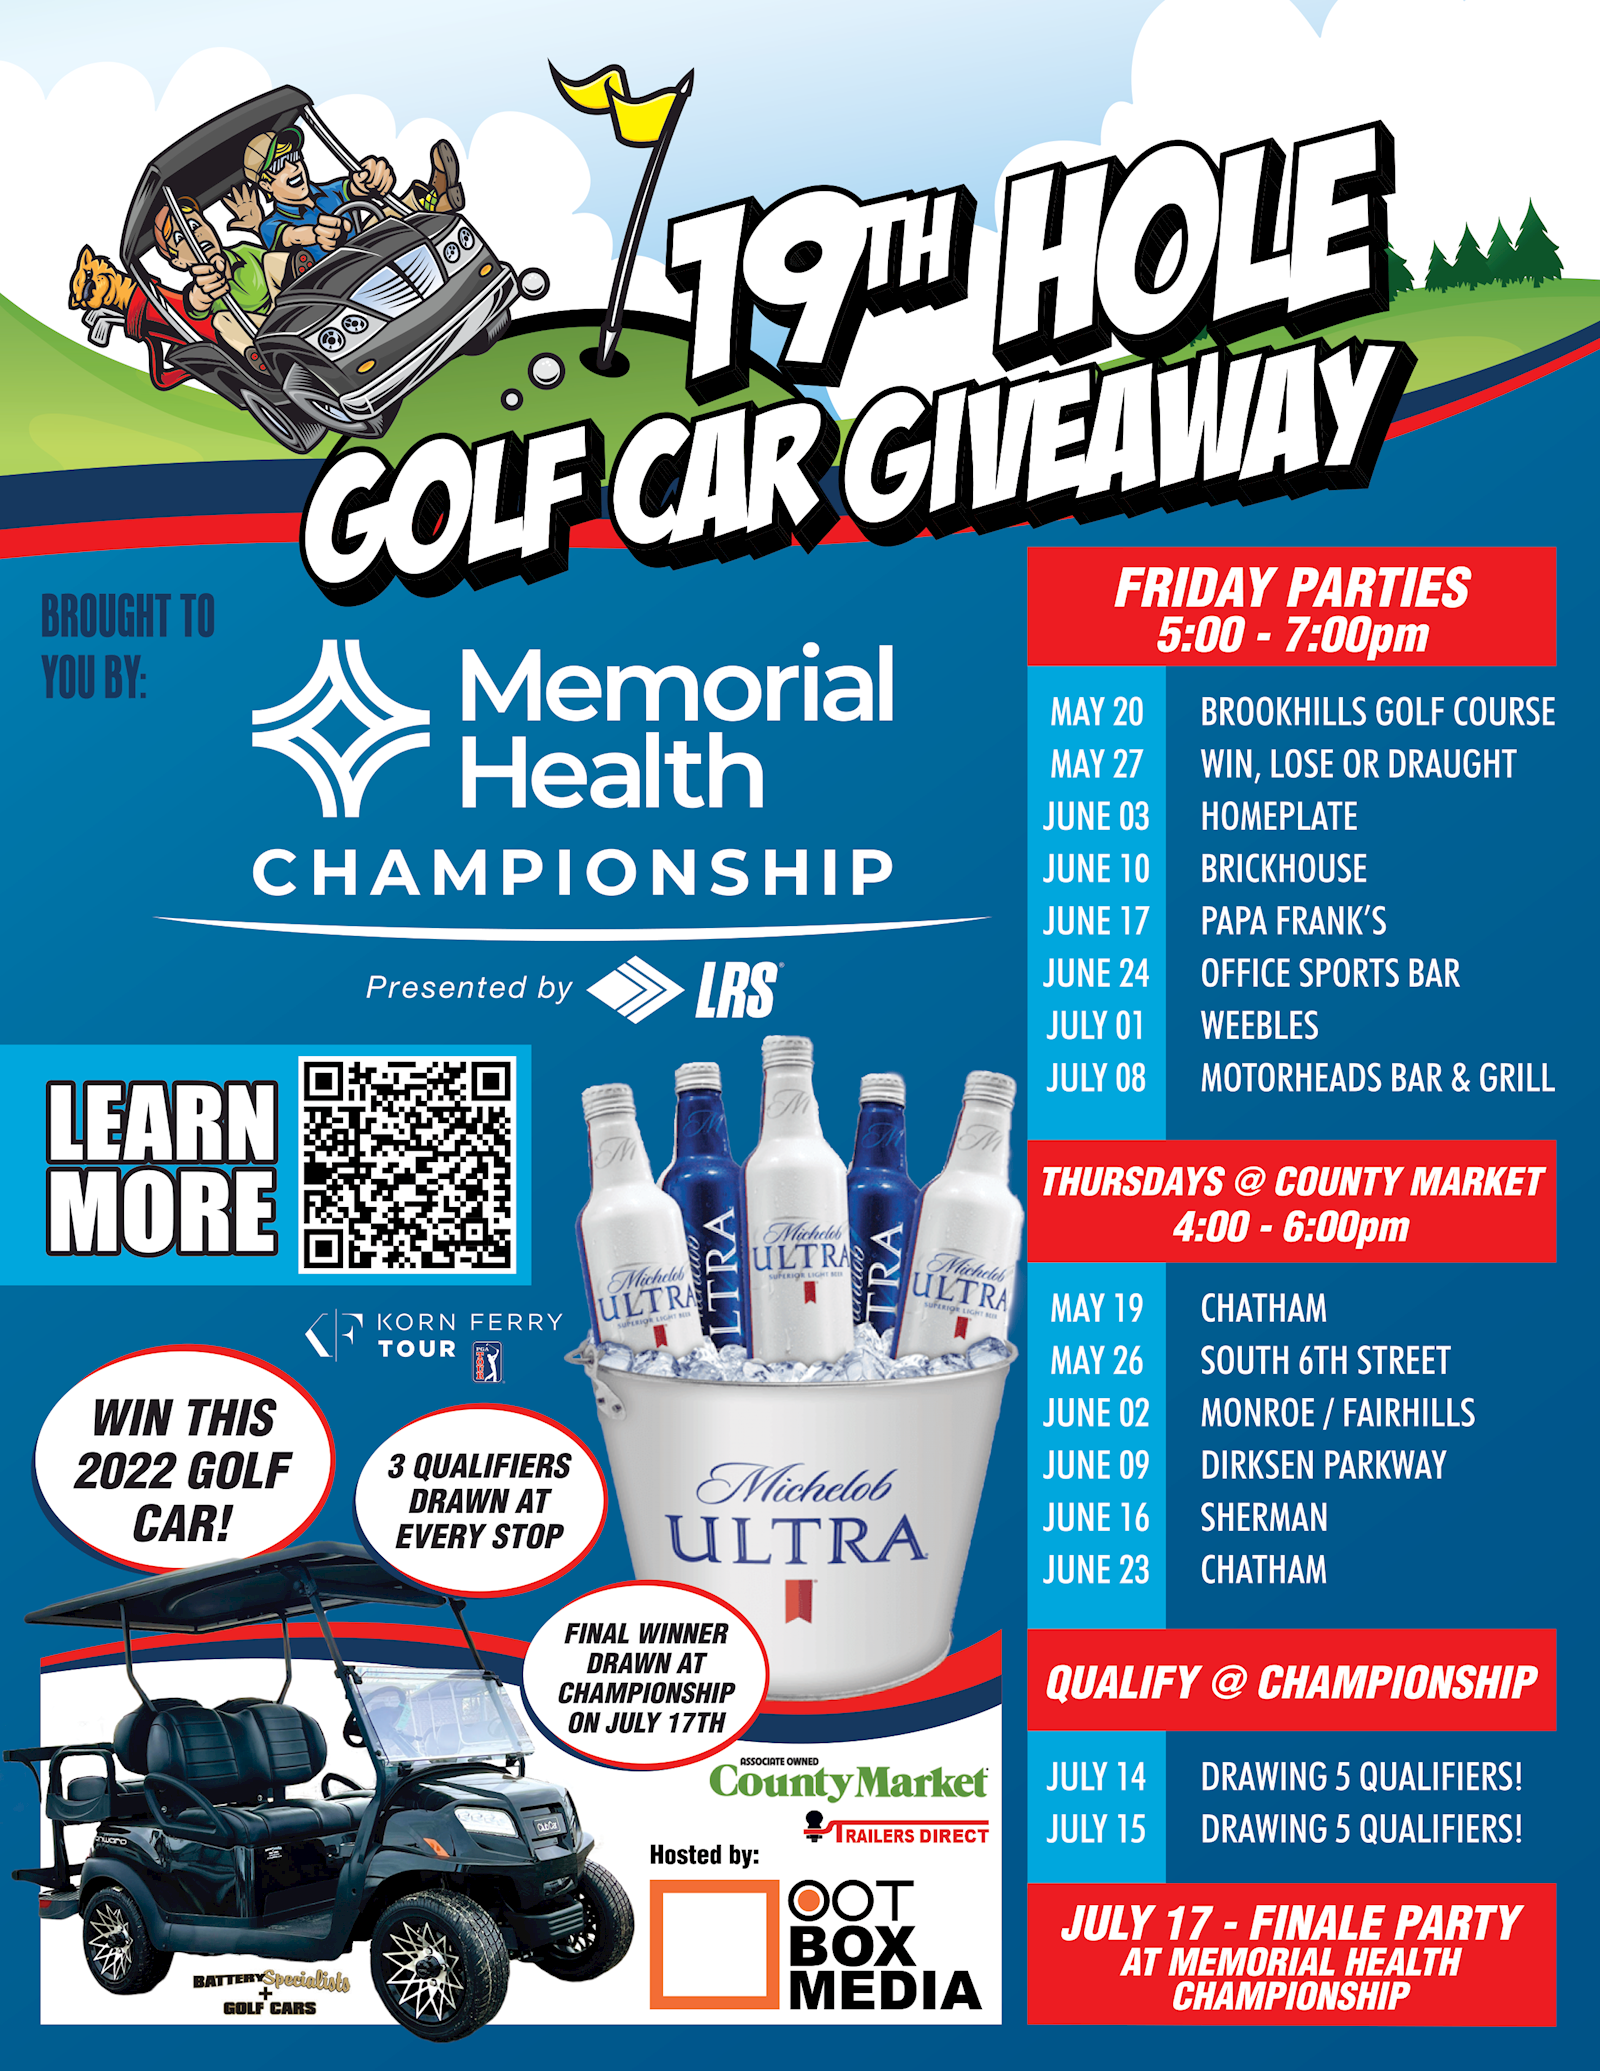 Memorial Health Championship 19th Hole Golf Car Giveaway